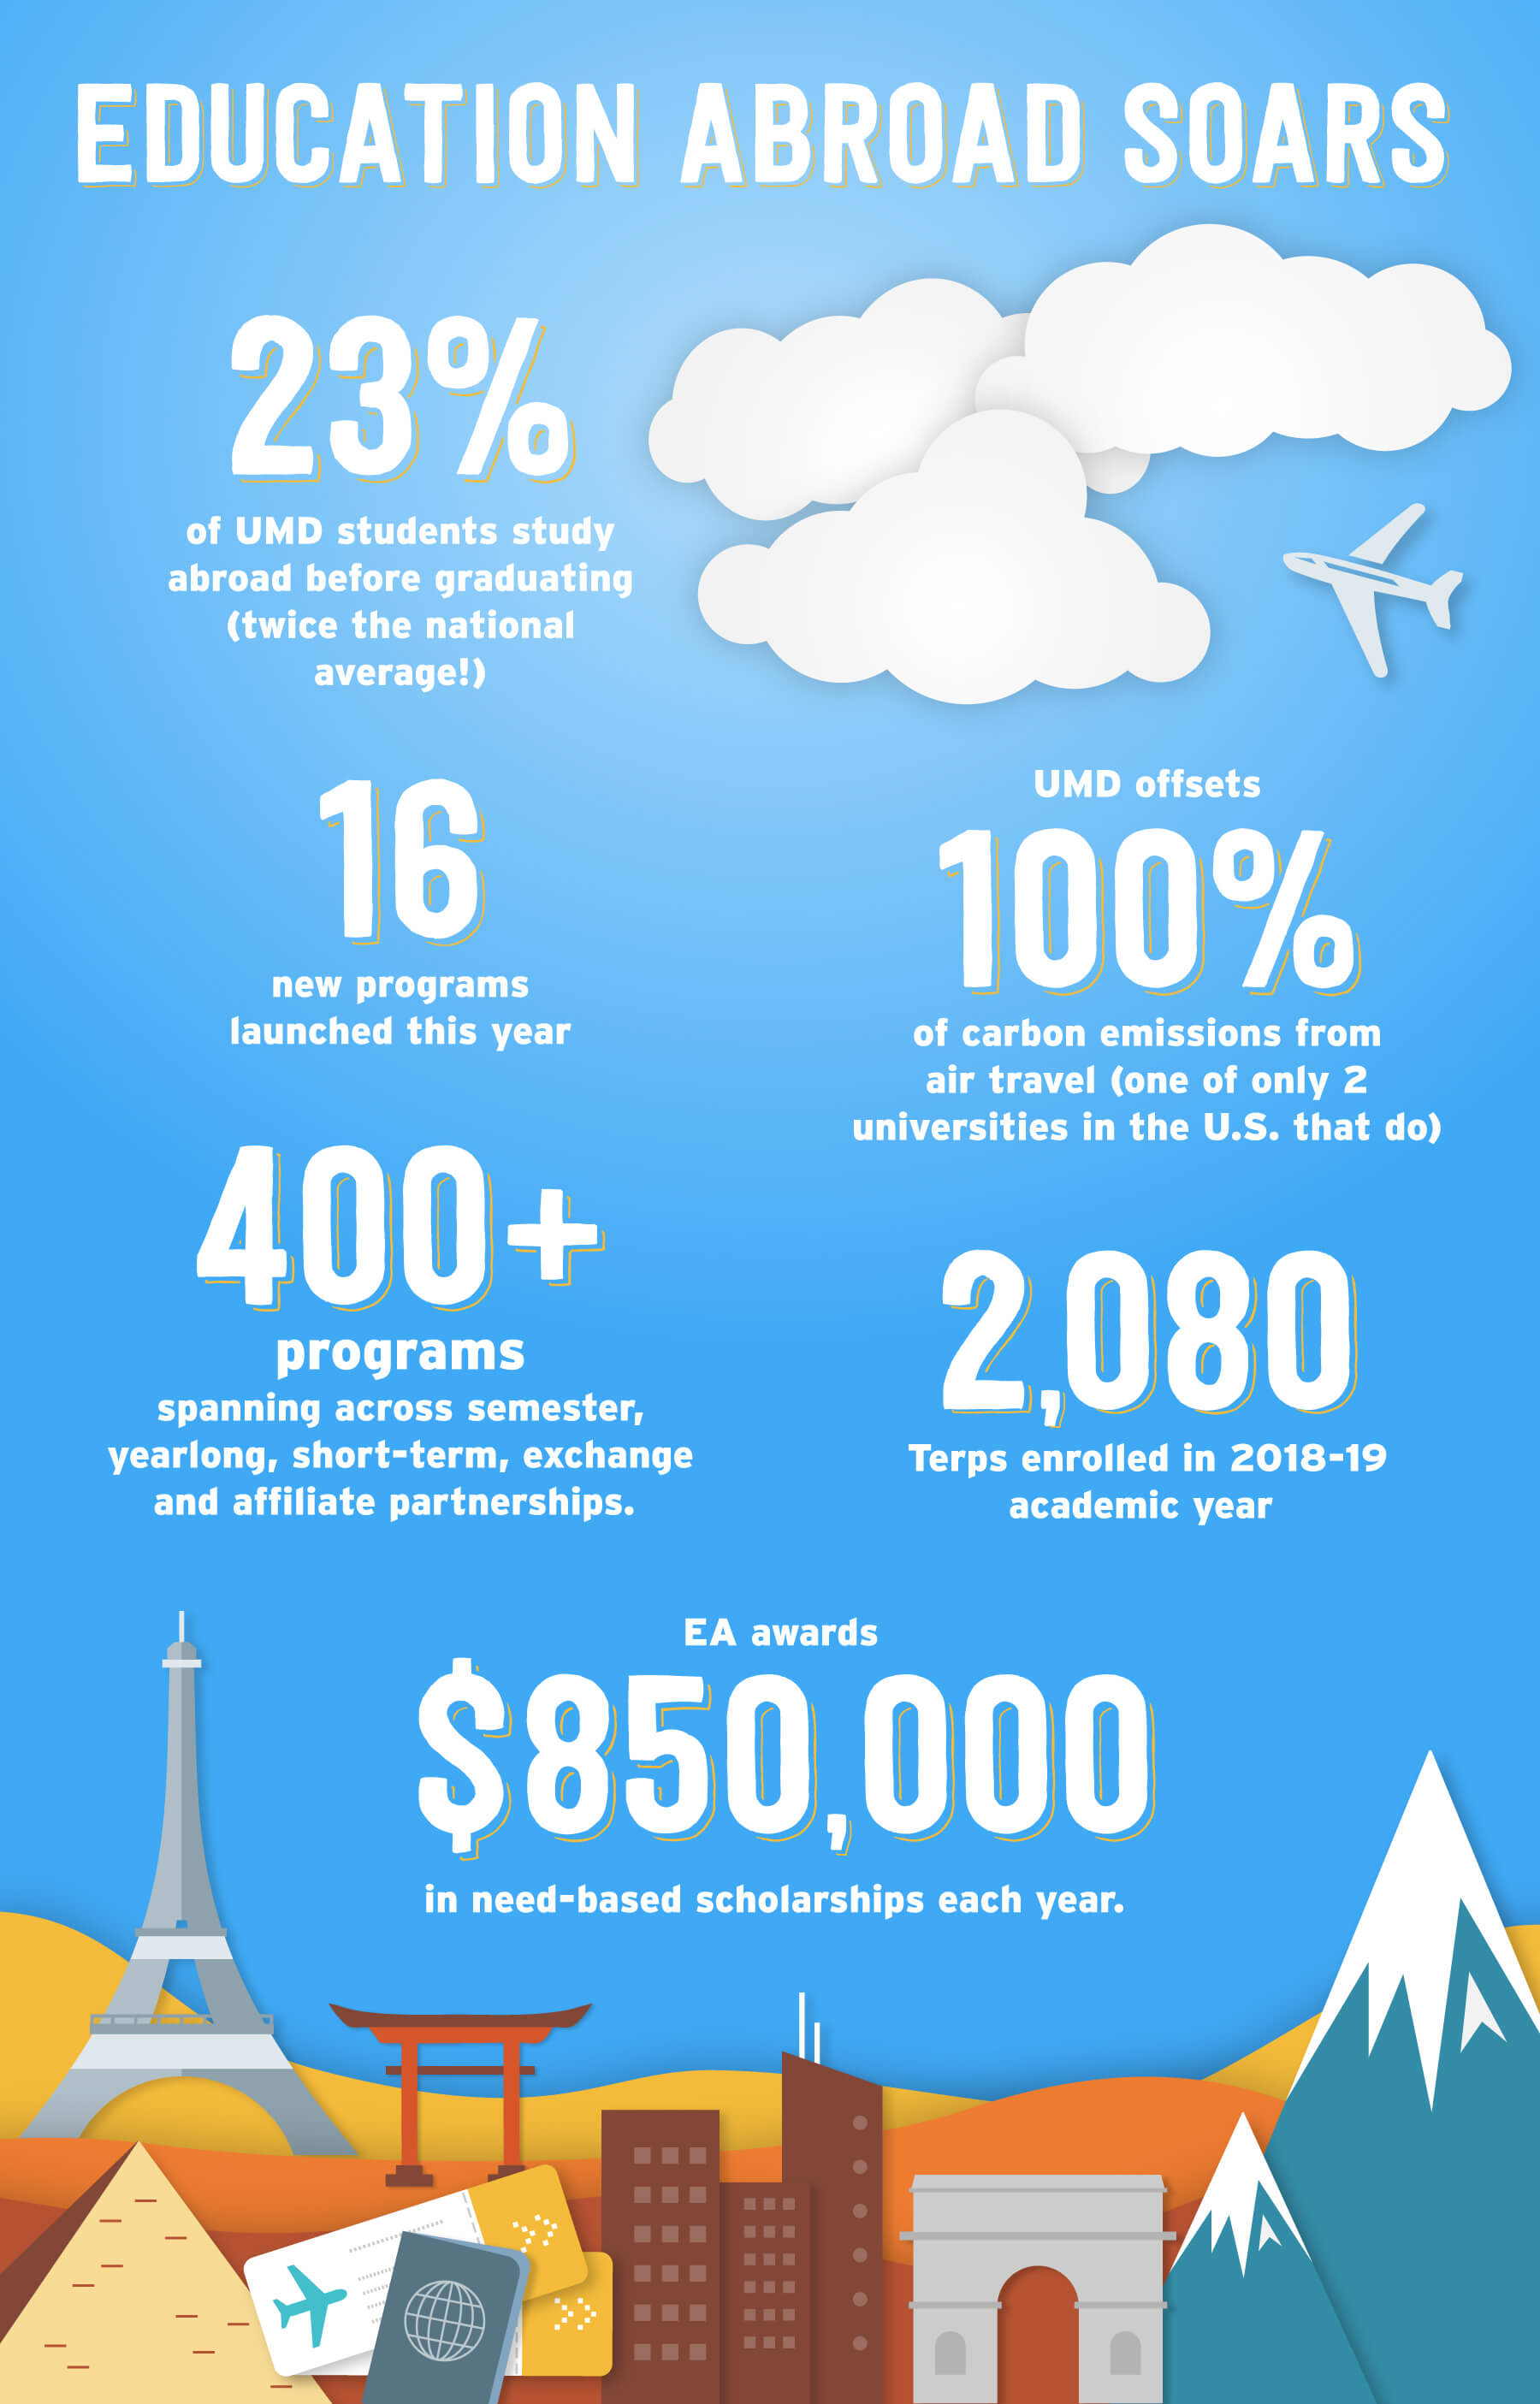 Infographic that reads: Education Abroad Soars. 23% of UMD students study abroad before graduating (twice the national average!) 16 new programs launched this year. UMD offsets 100% of carbon emissions from air travel (one of only two universities in the U.S. that do). 400+ programs spanning across semester, yearlong, short-term, exchange and affiliate partnerships. 2,080 Terps enrolled in 2018–19 academic year. EA awards $850,000 in need-based scholarships each year.